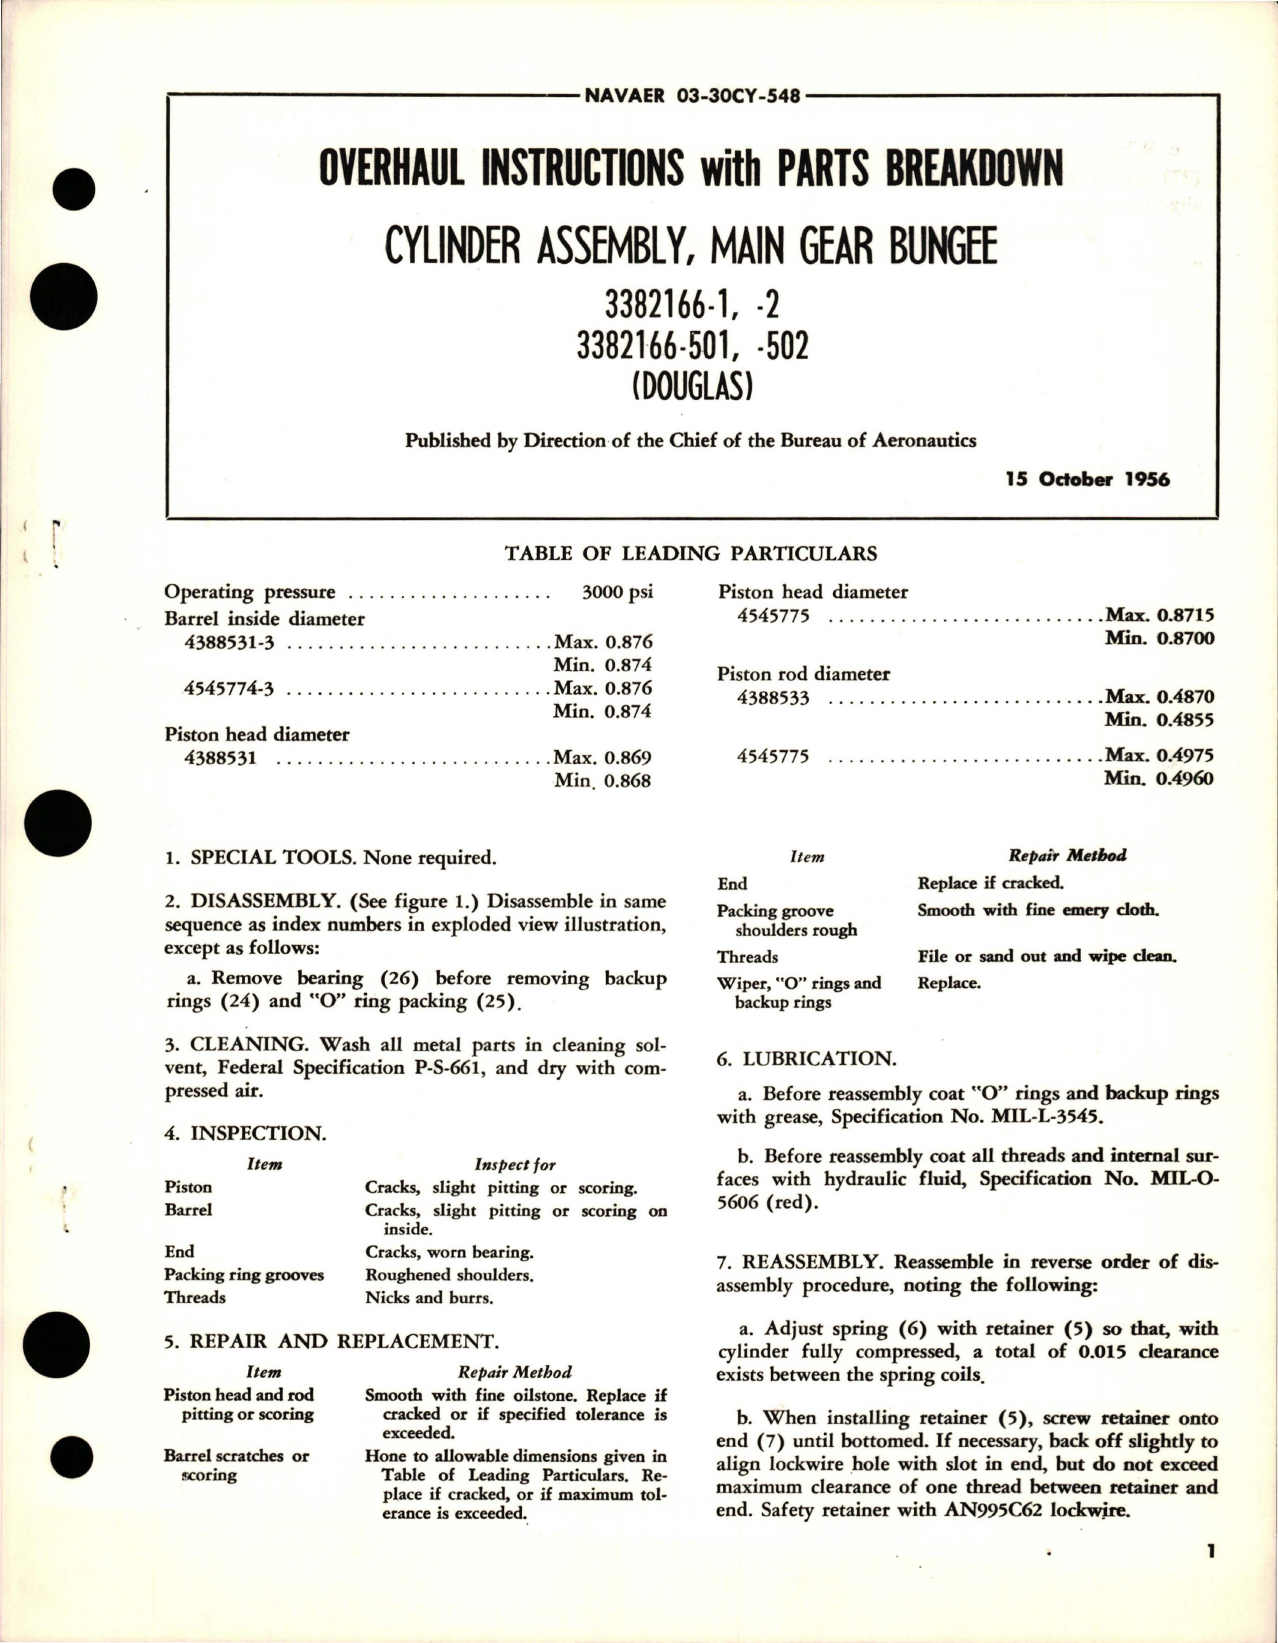 Sample page 1 from AirCorps Library document: Overhaul Instructions with Parts Breakdown for Main Gear Bungee Cylinder Assembly - 3382166-1, 3382166-2, 3382166-501, and 3382166-502